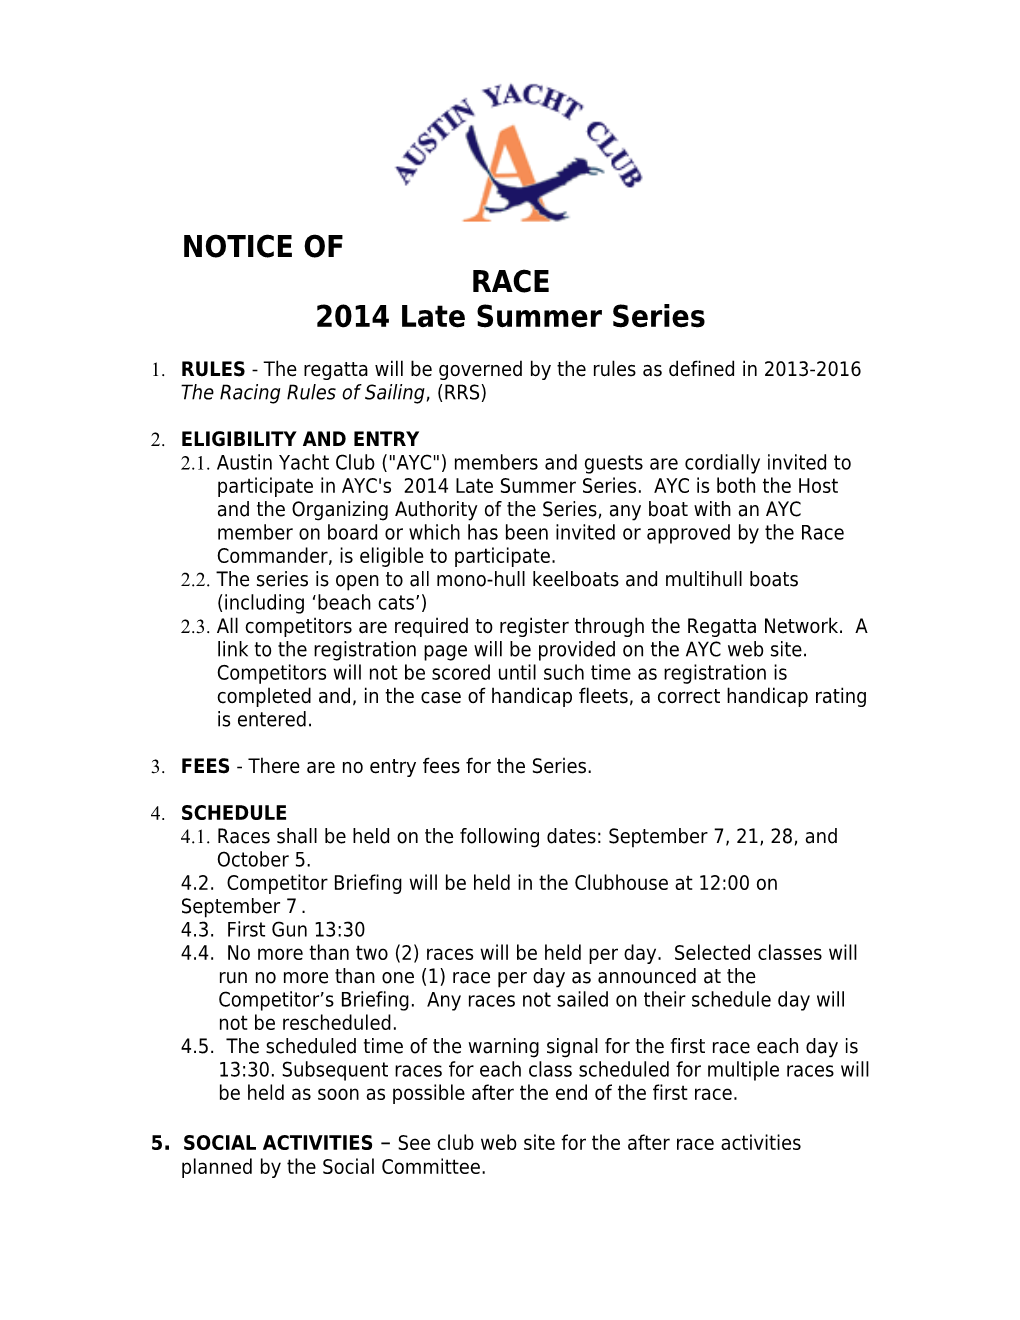 2014 Late Summer Series